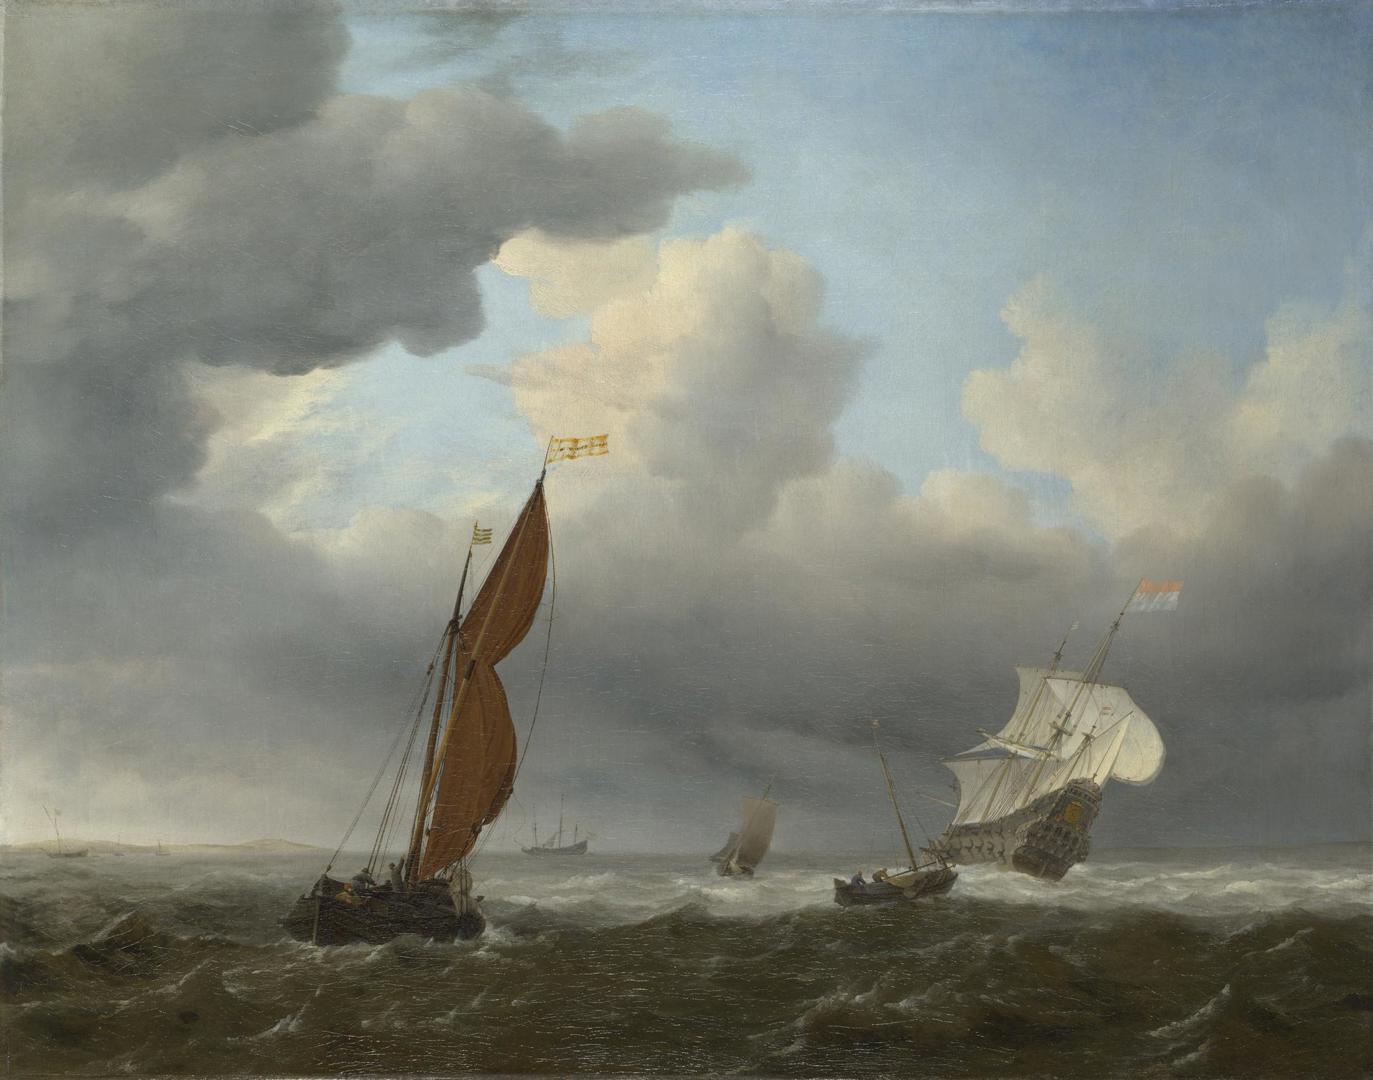 A Dutch Ship and Other Small Vessels in a Strong Breeze by Willem van de Velde